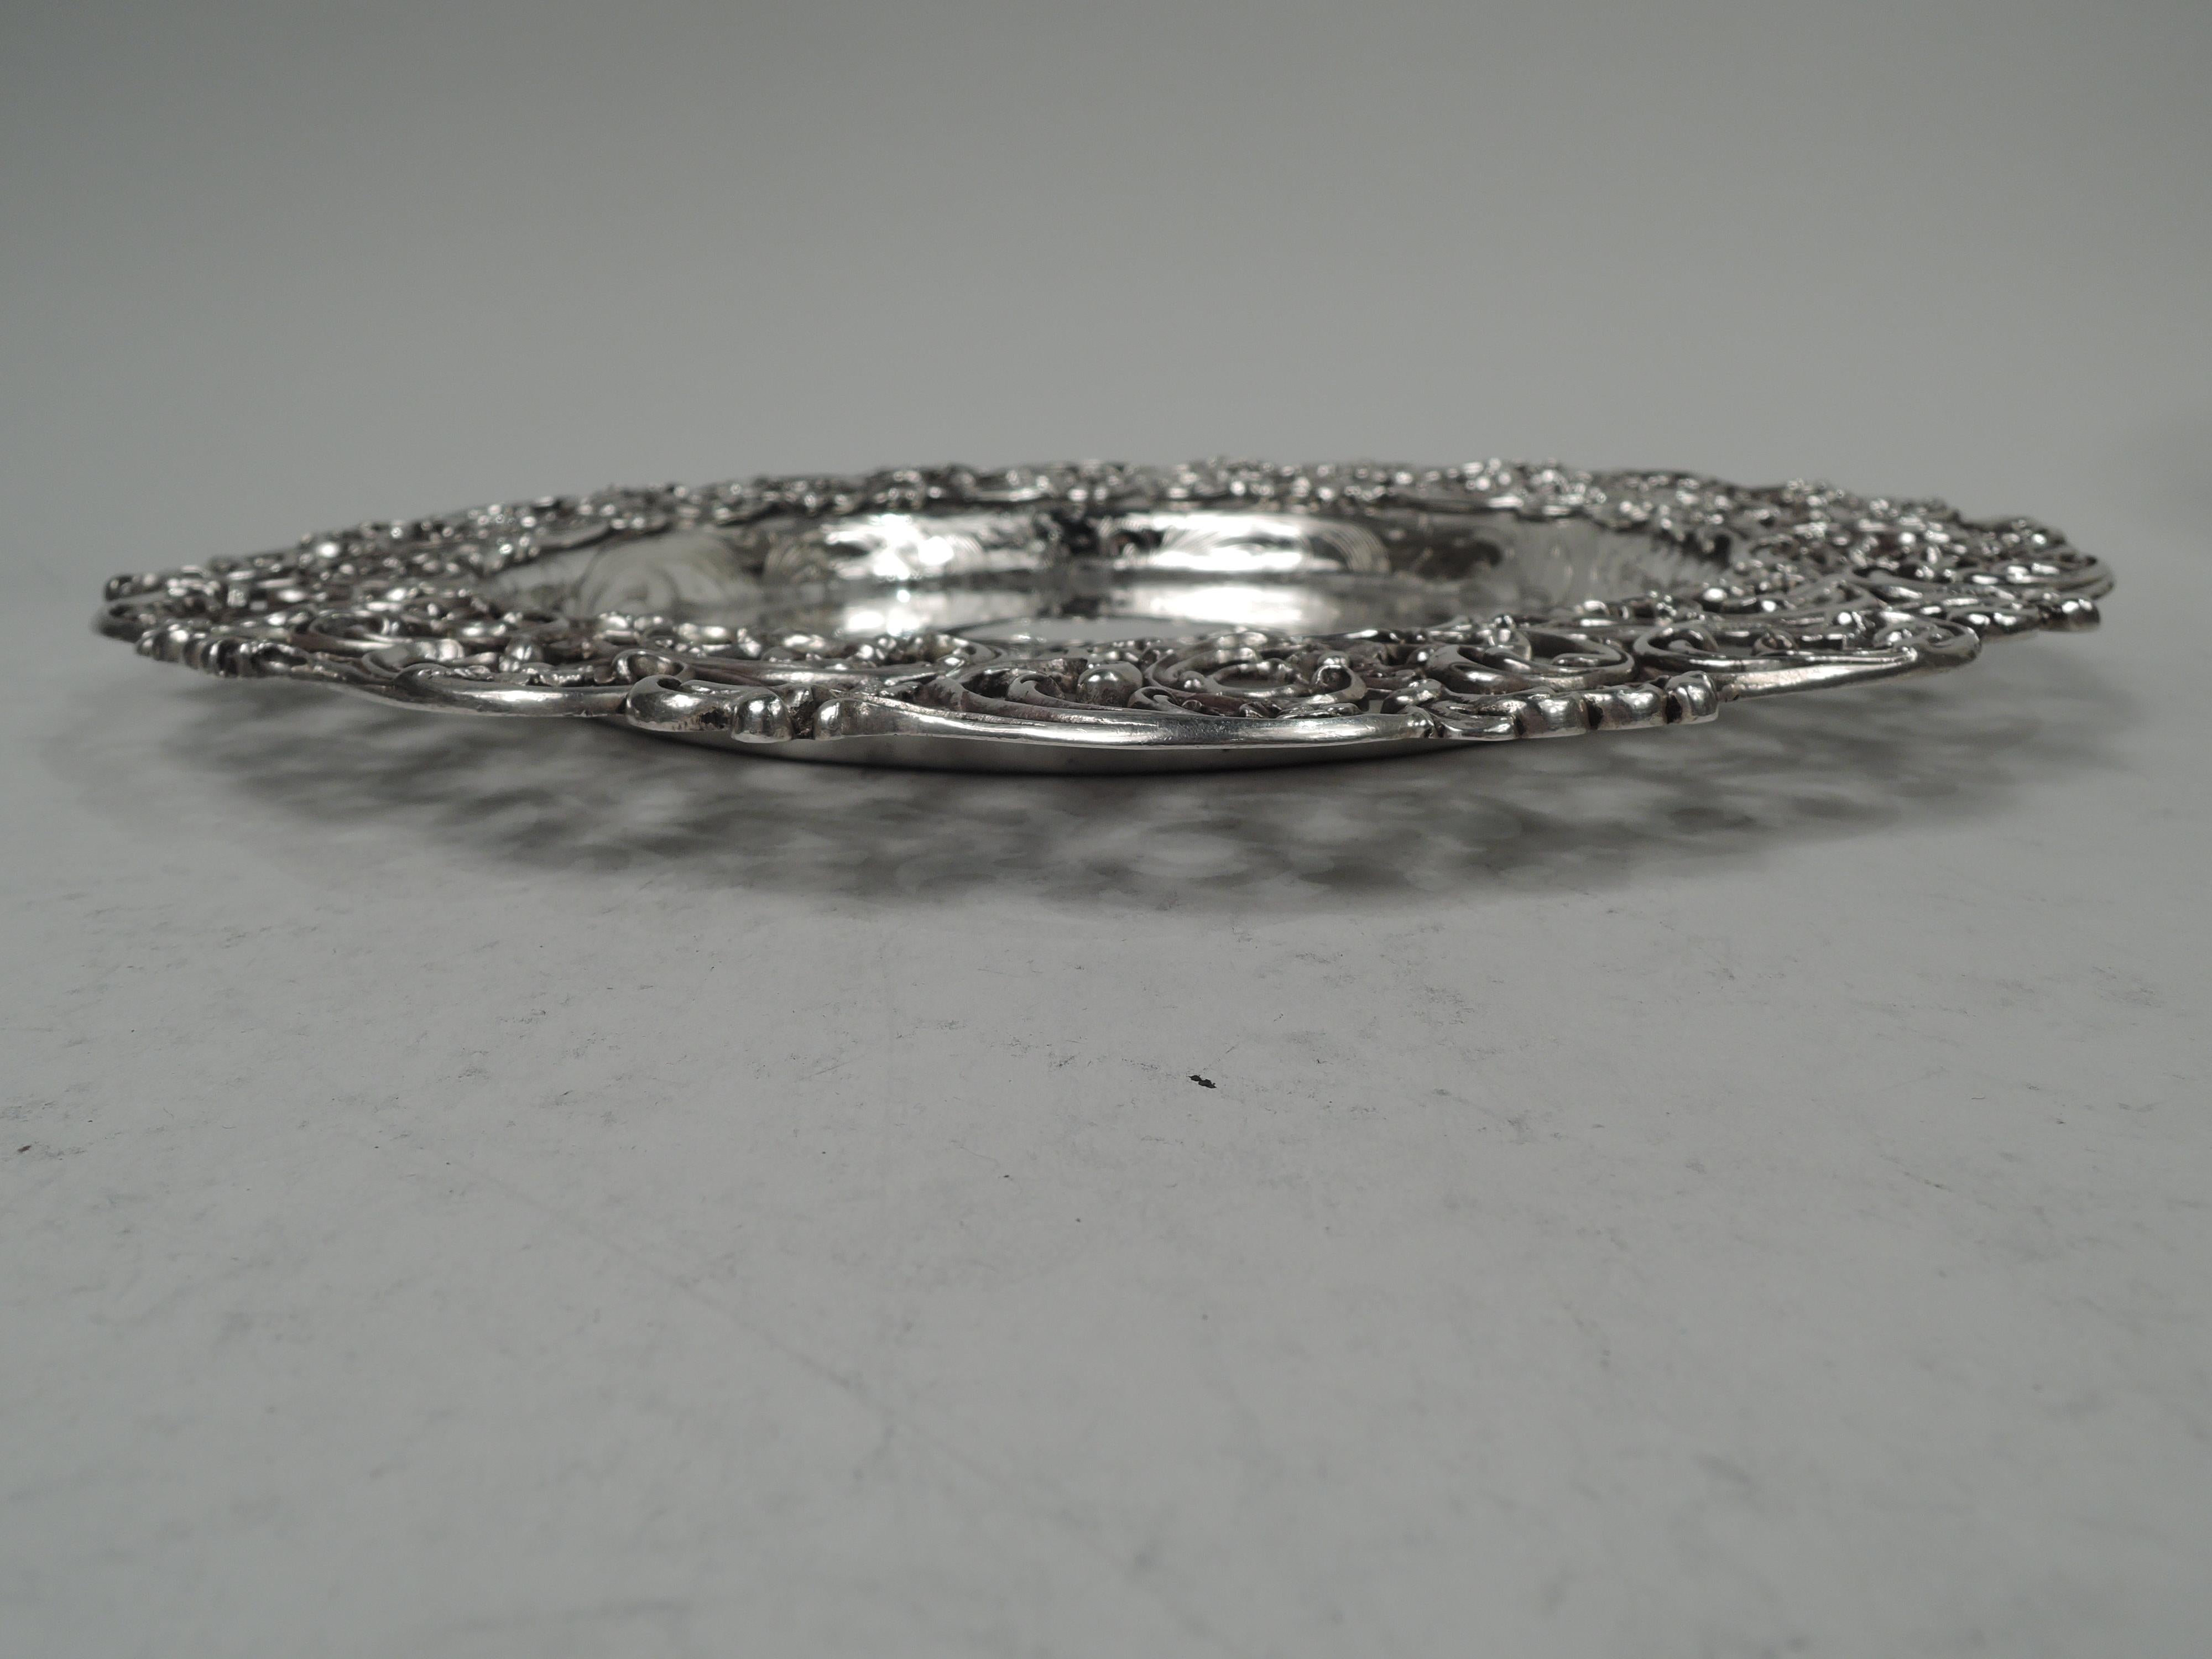 Fancy Victorian sterling silver cake plate. Made by Gorham in Providence, ca 1890. Round and deep well engraved with leafing scrolls and flowers; center vacant. Applied and cast wide and open rim with same. Fully marked including maker’s stamp and